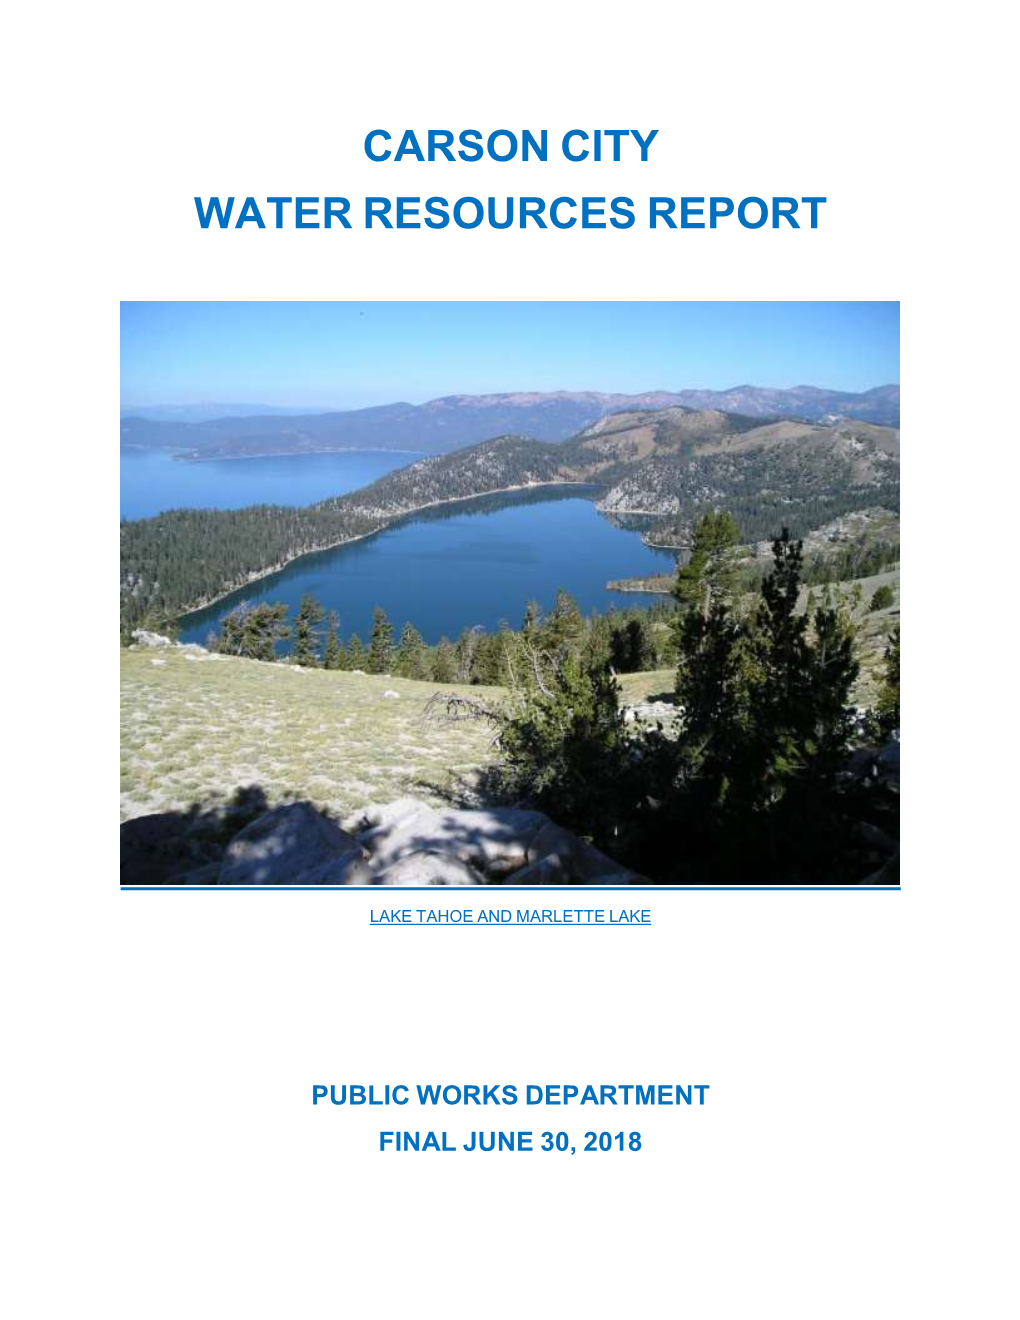 Carson City Water Resources Report